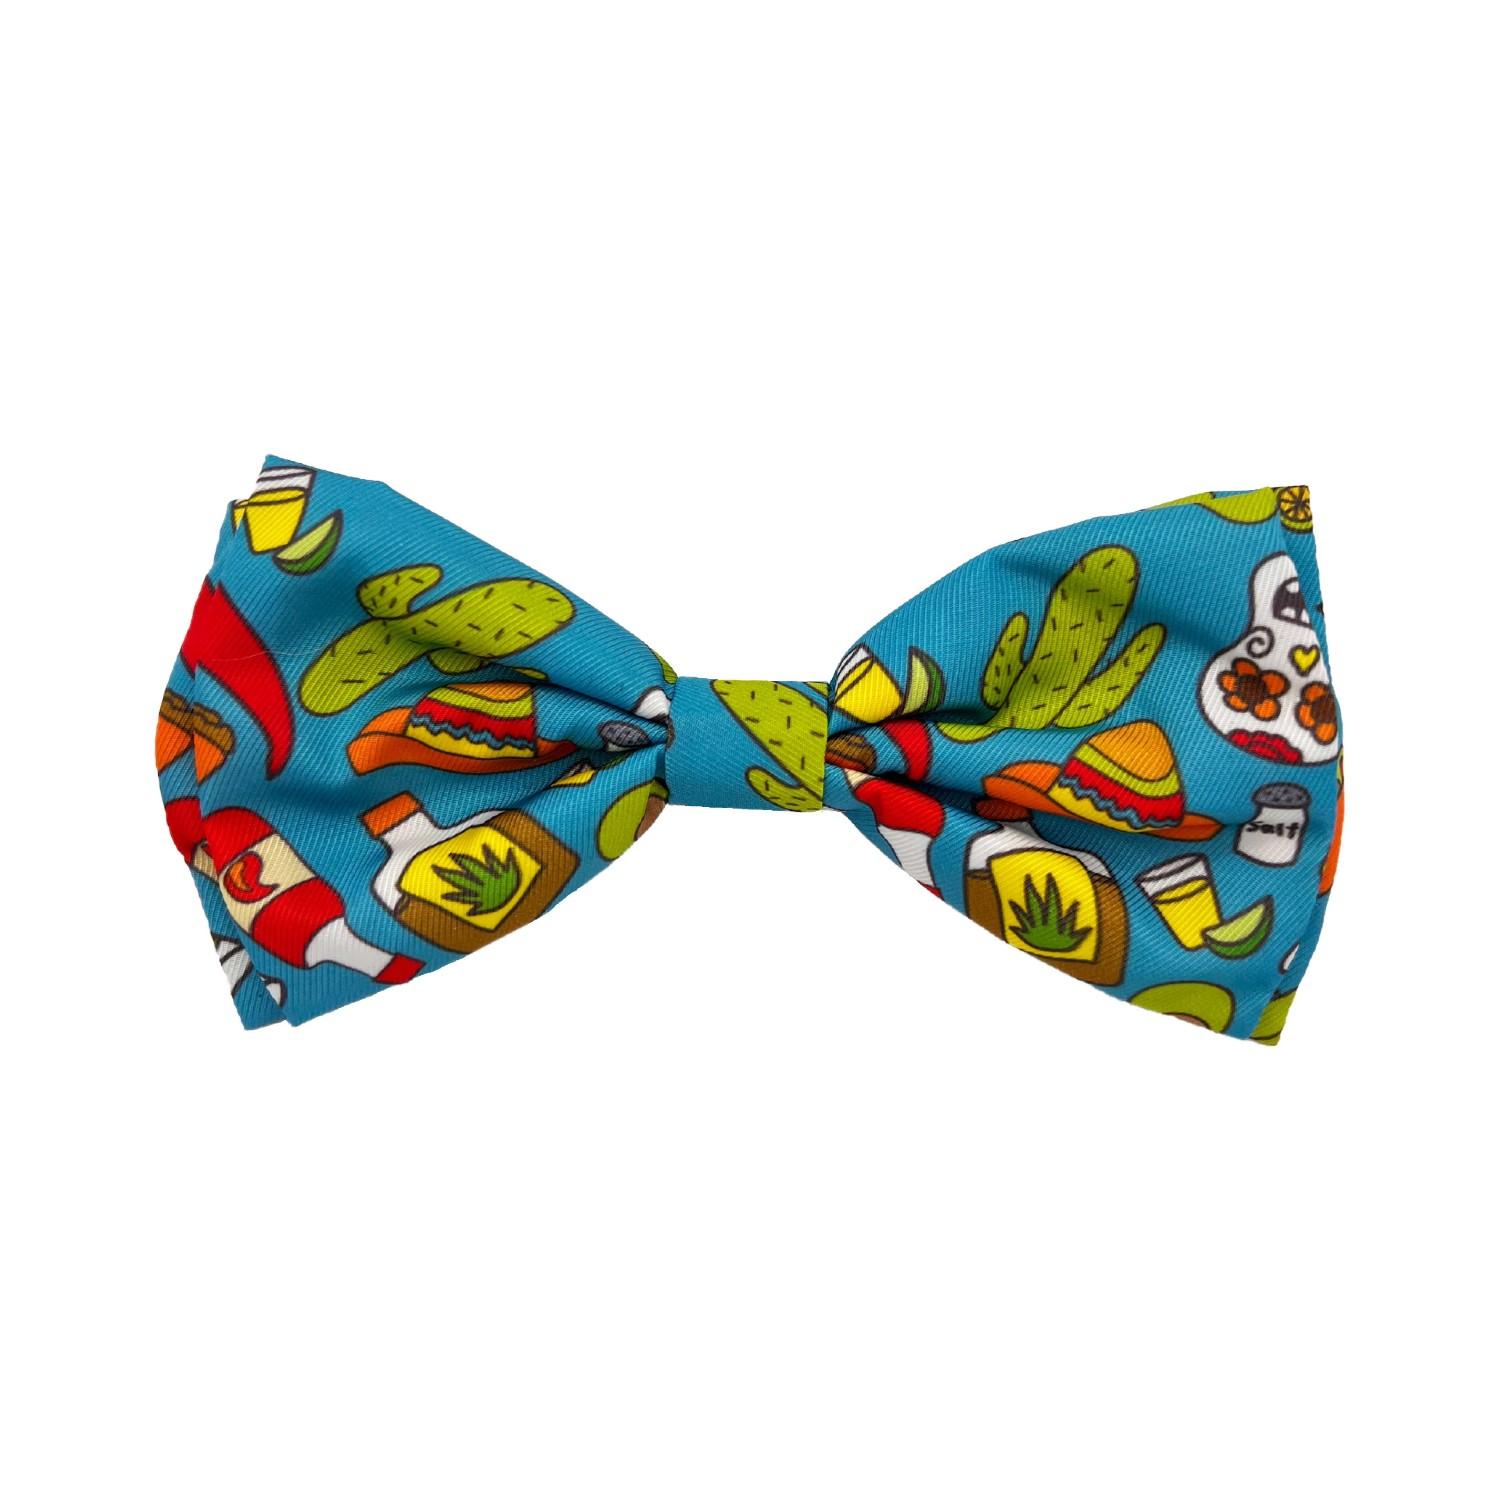 Huxley & Kent Dog and Cat Bow Tie Collar Attachment - Cinco Fiesta